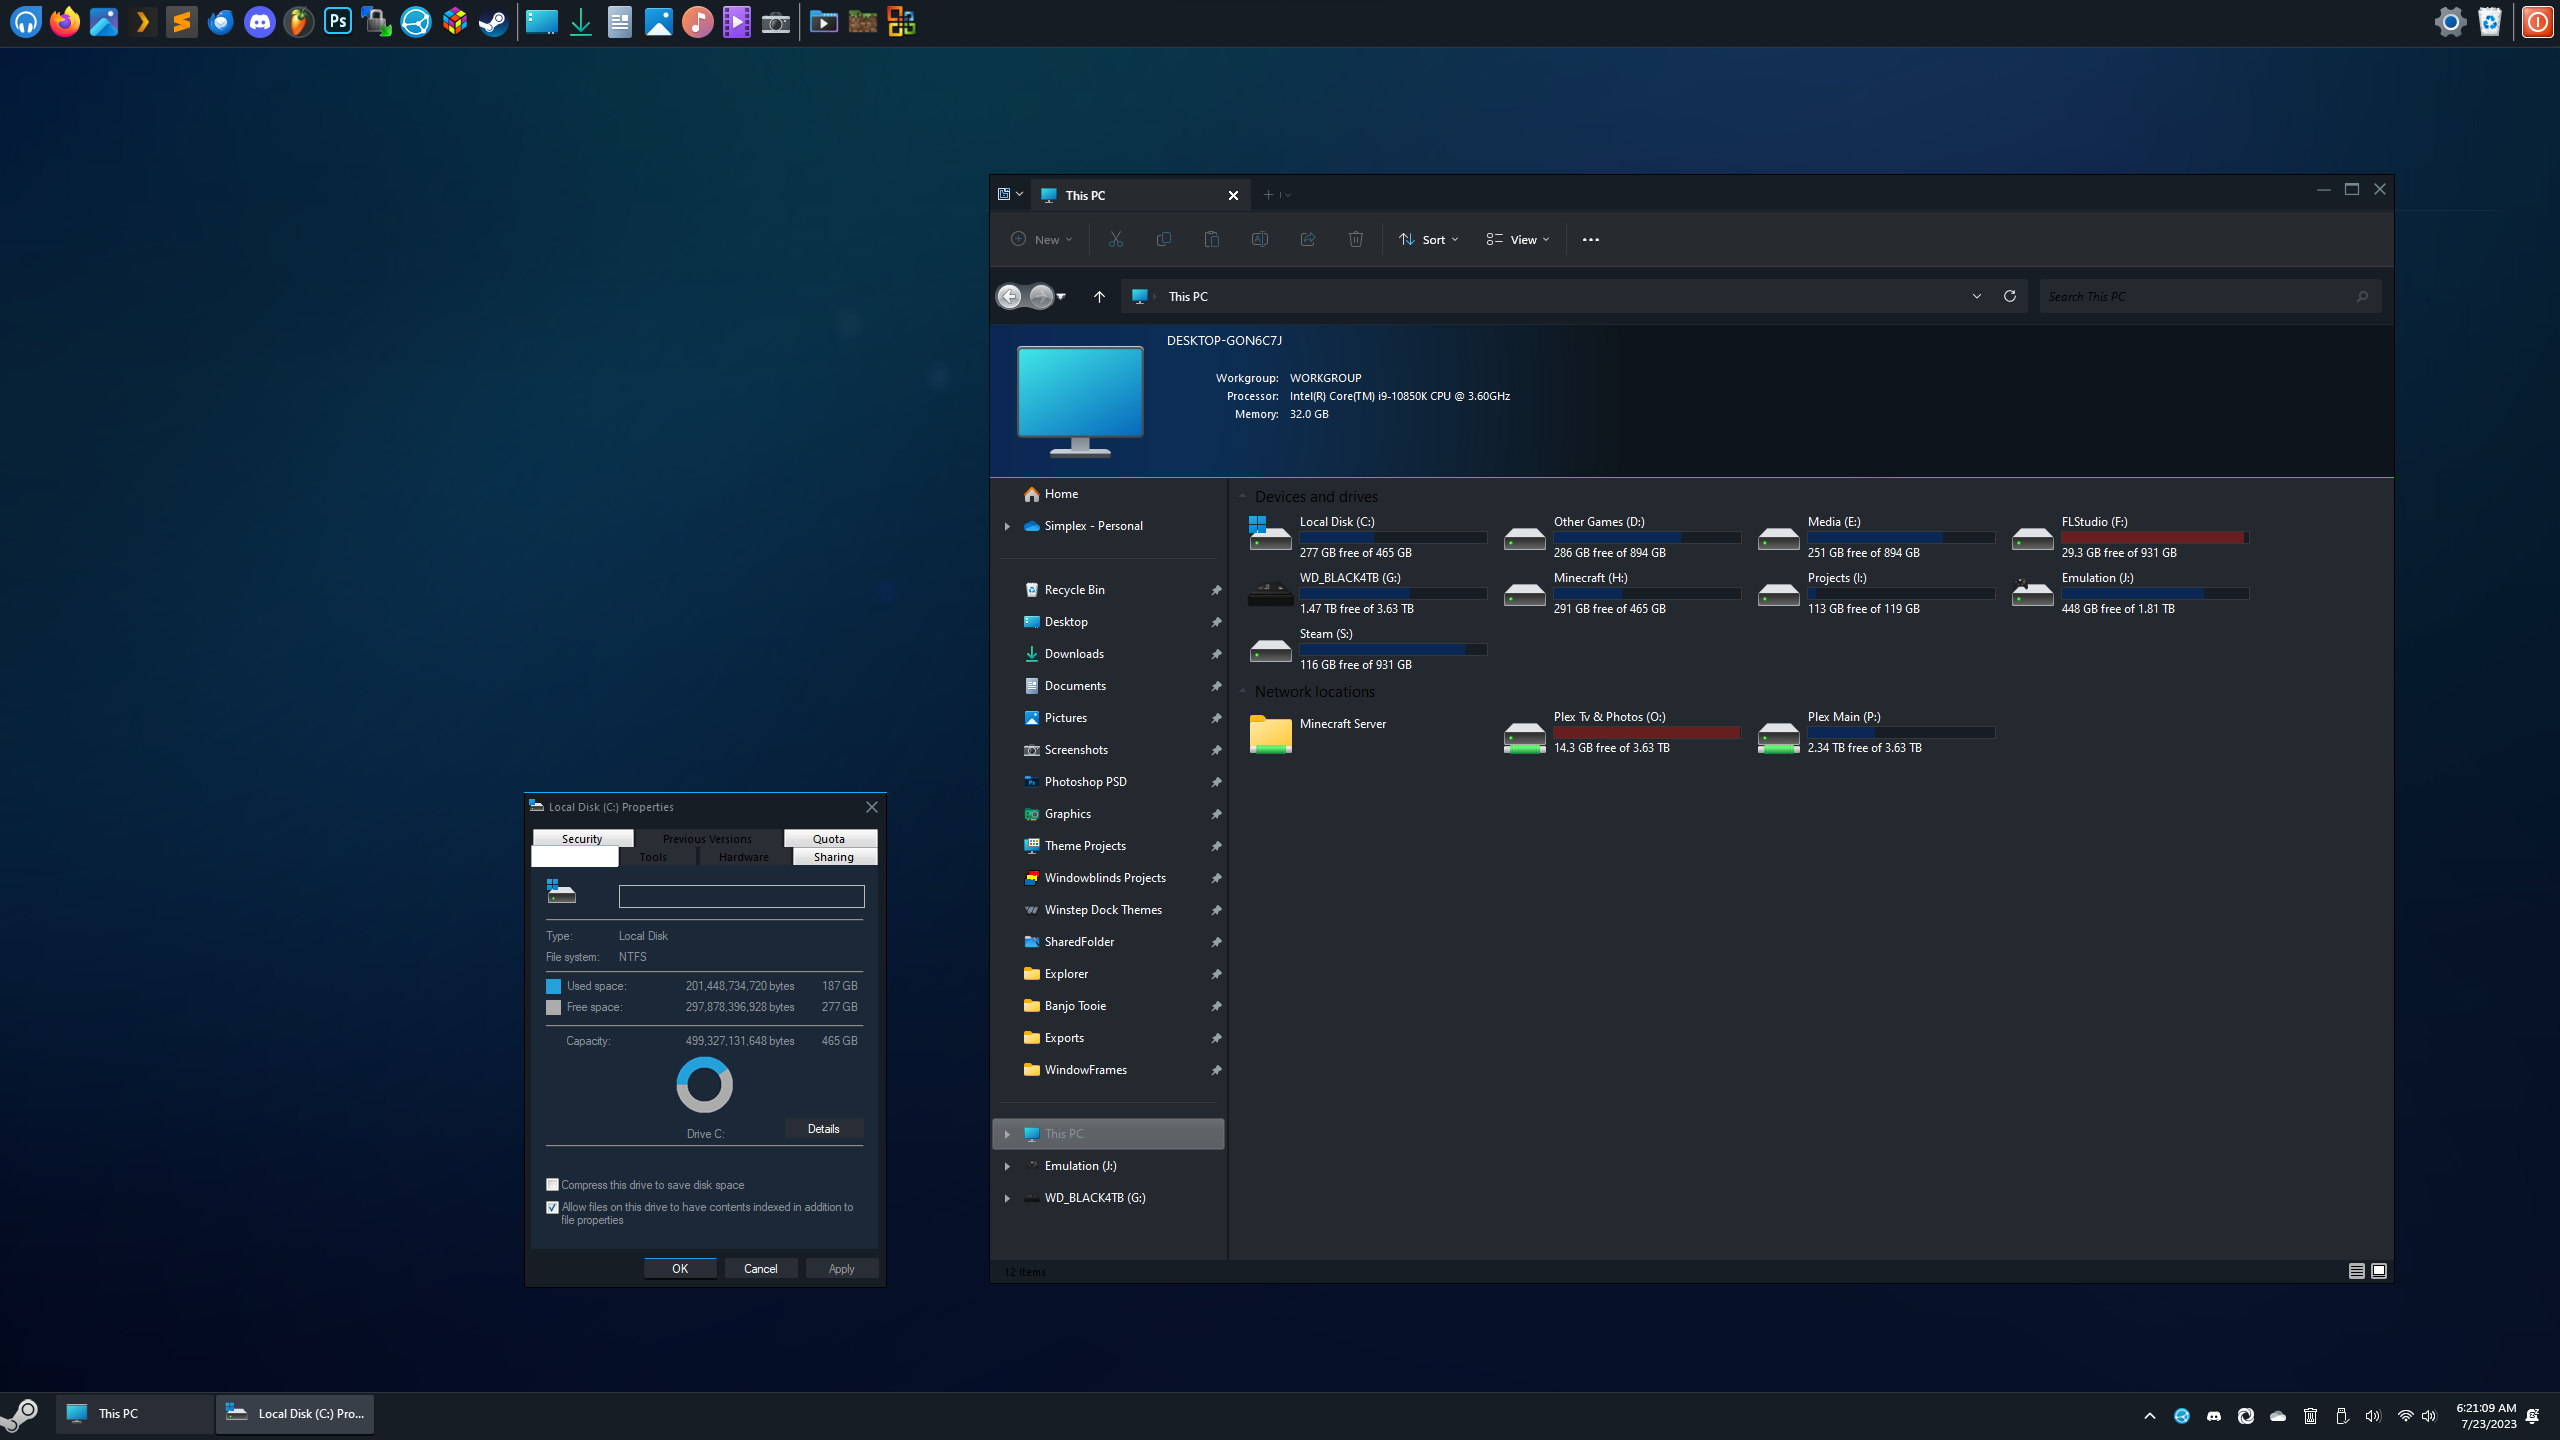 Steampowered23 Stardock Windowblinds11 Preview 2 By Simplexdesignss